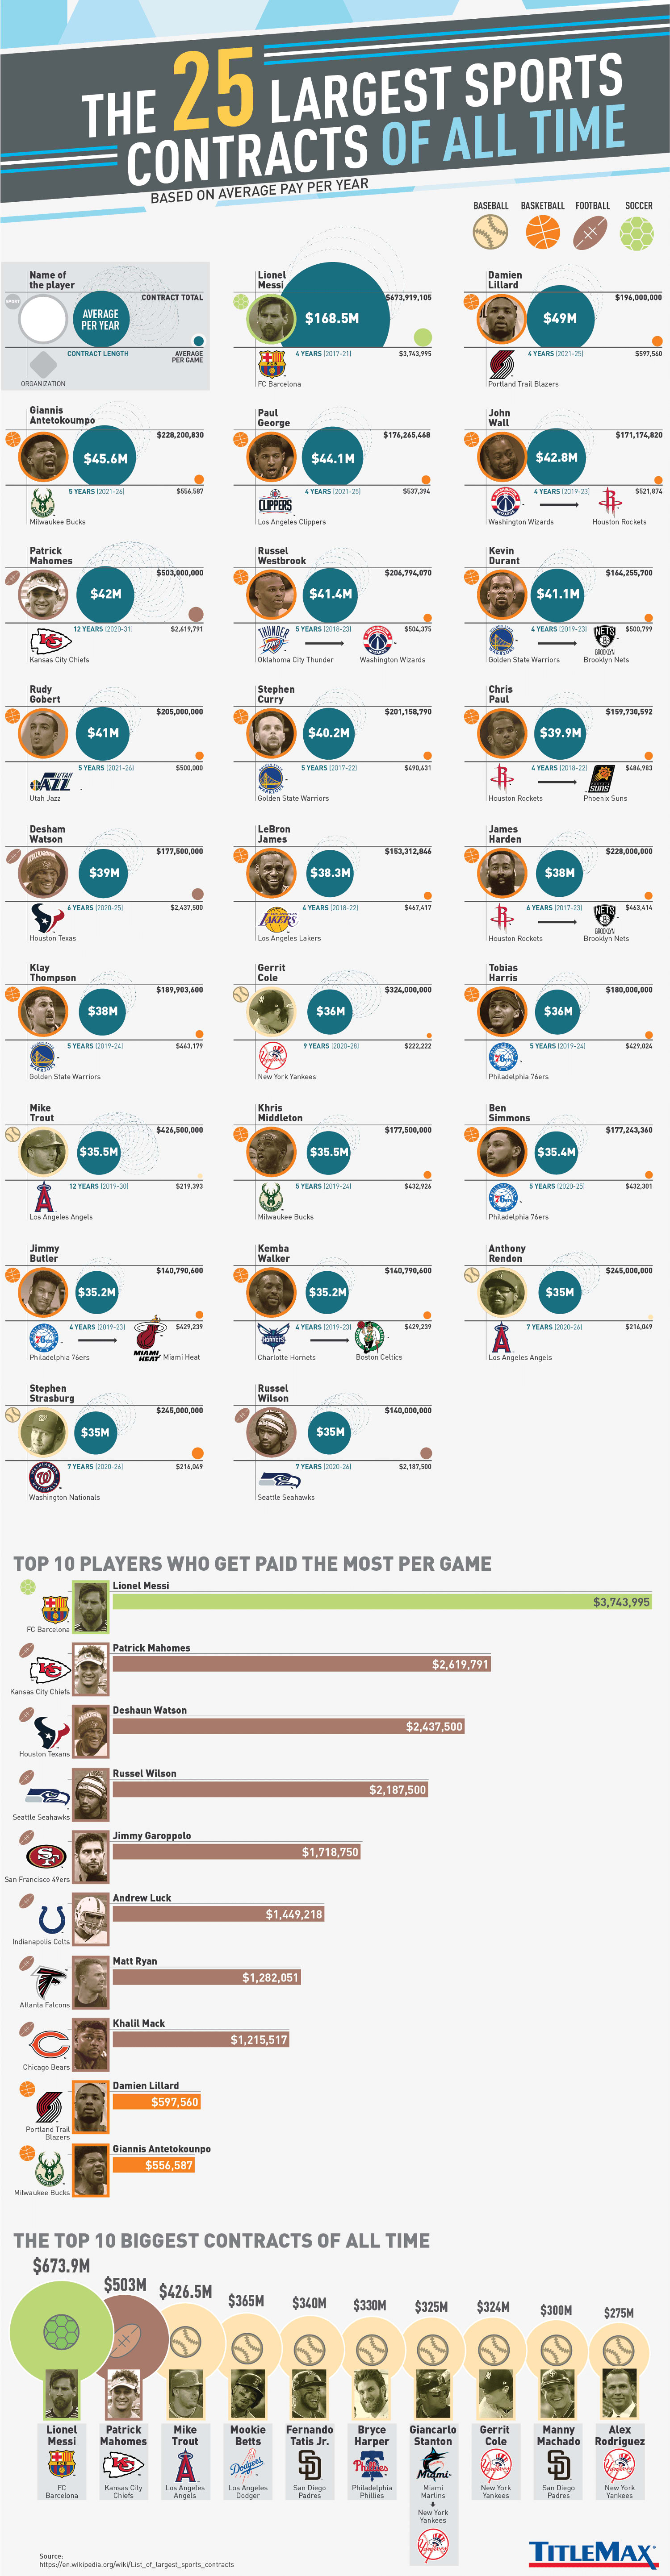 Ranking the Largest MLB Contracts of All-Time